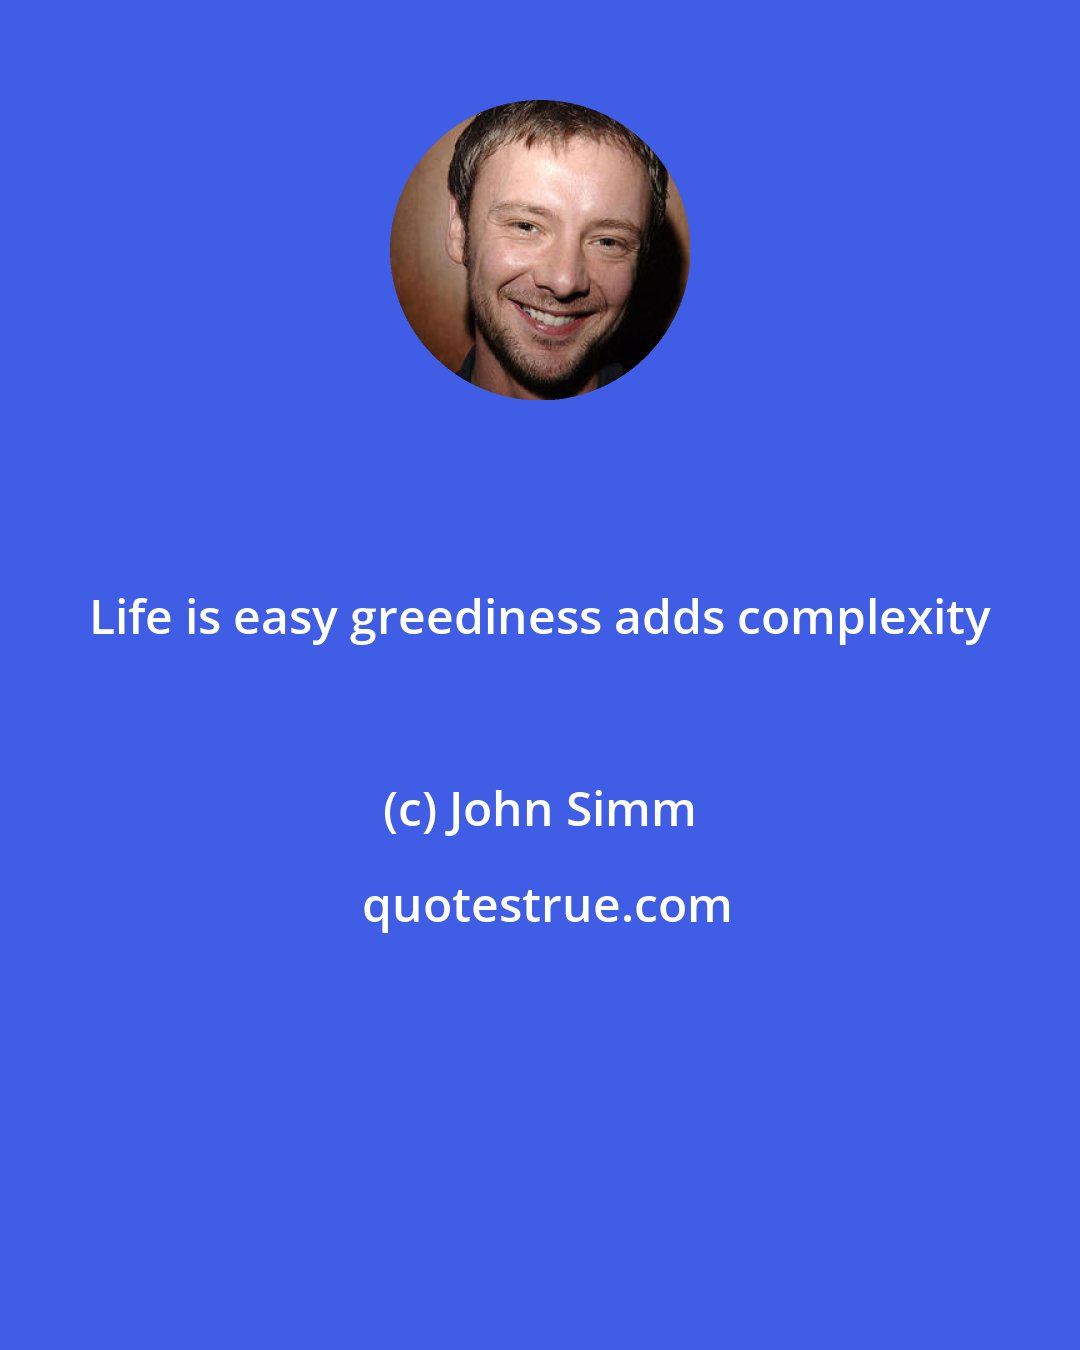 John Simm: Life is easy greediness adds complexity